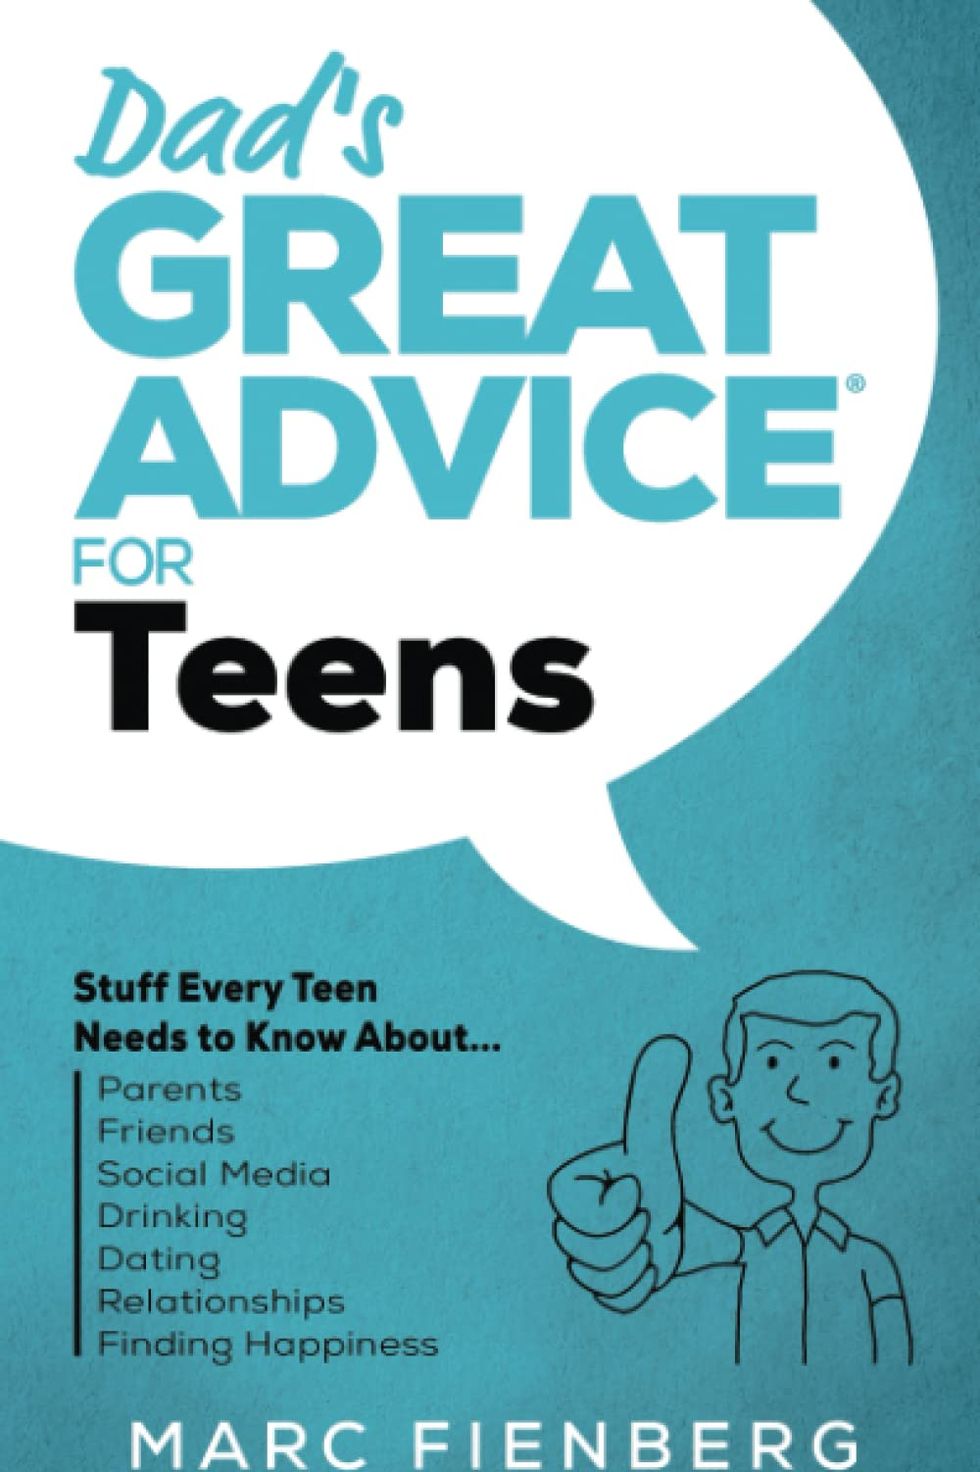 'Dad's Great Advice for Teens' Book